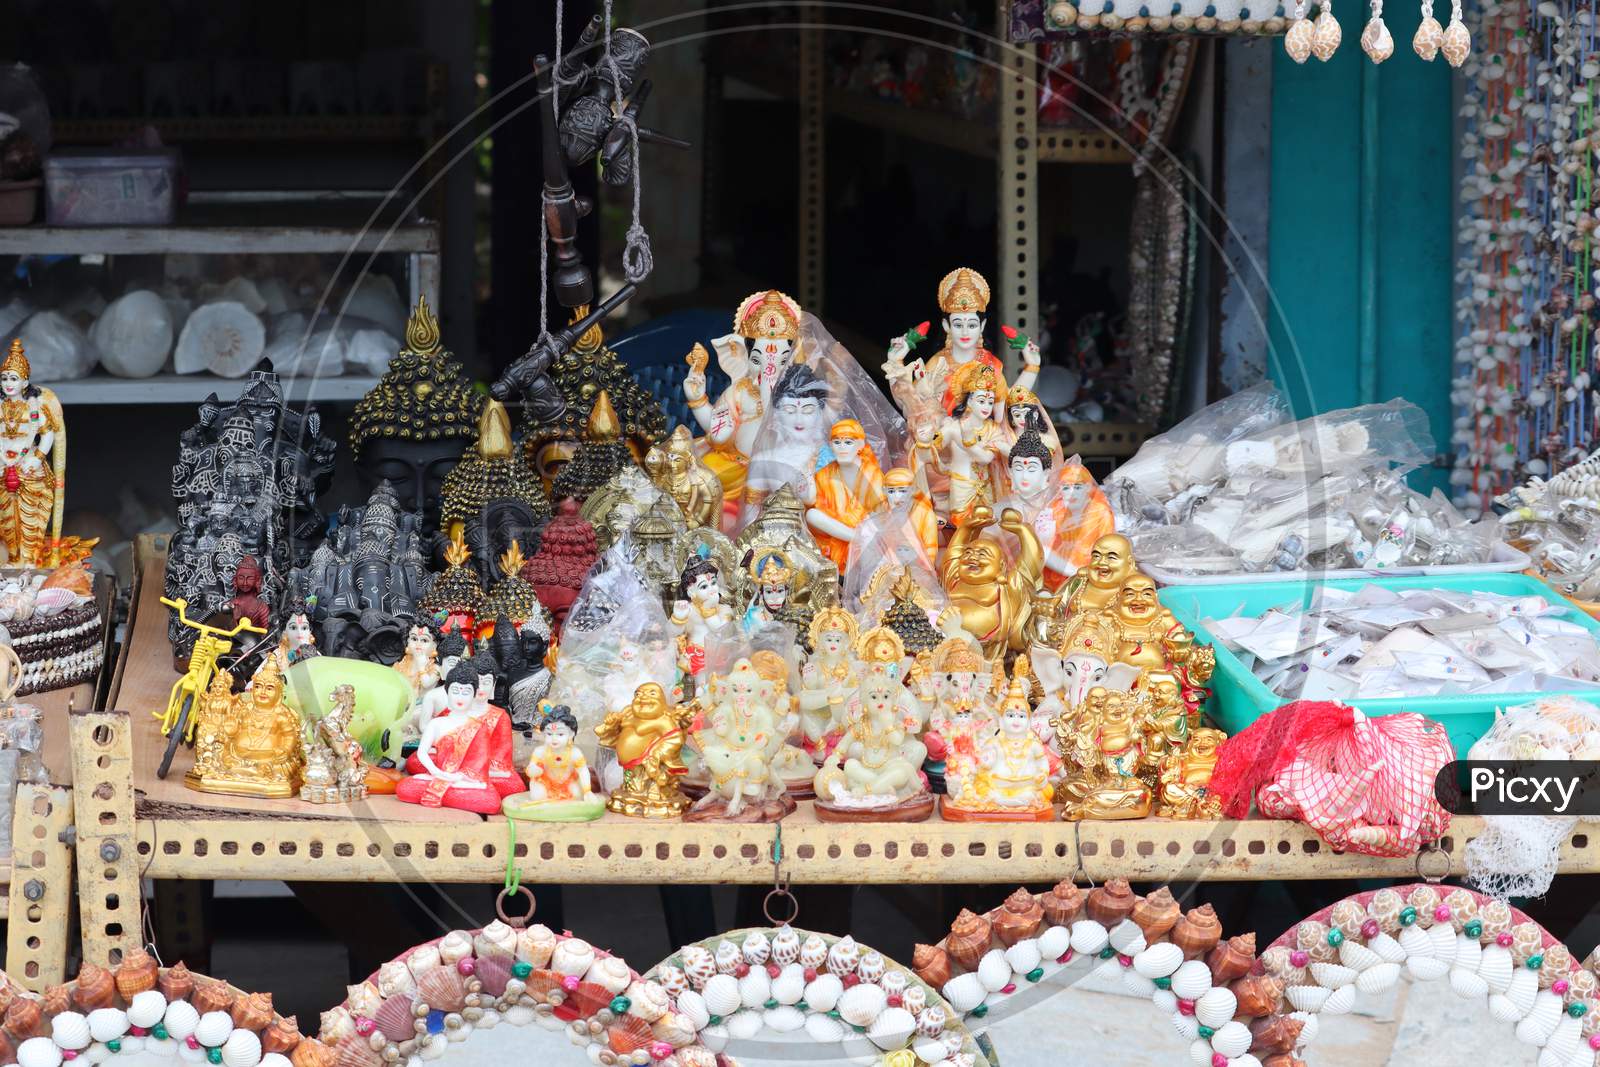 Preparations Started For The Upcoming Festival In The Market, In Which The Retail Shop Adorned With The Idols Of Hindu Goddess